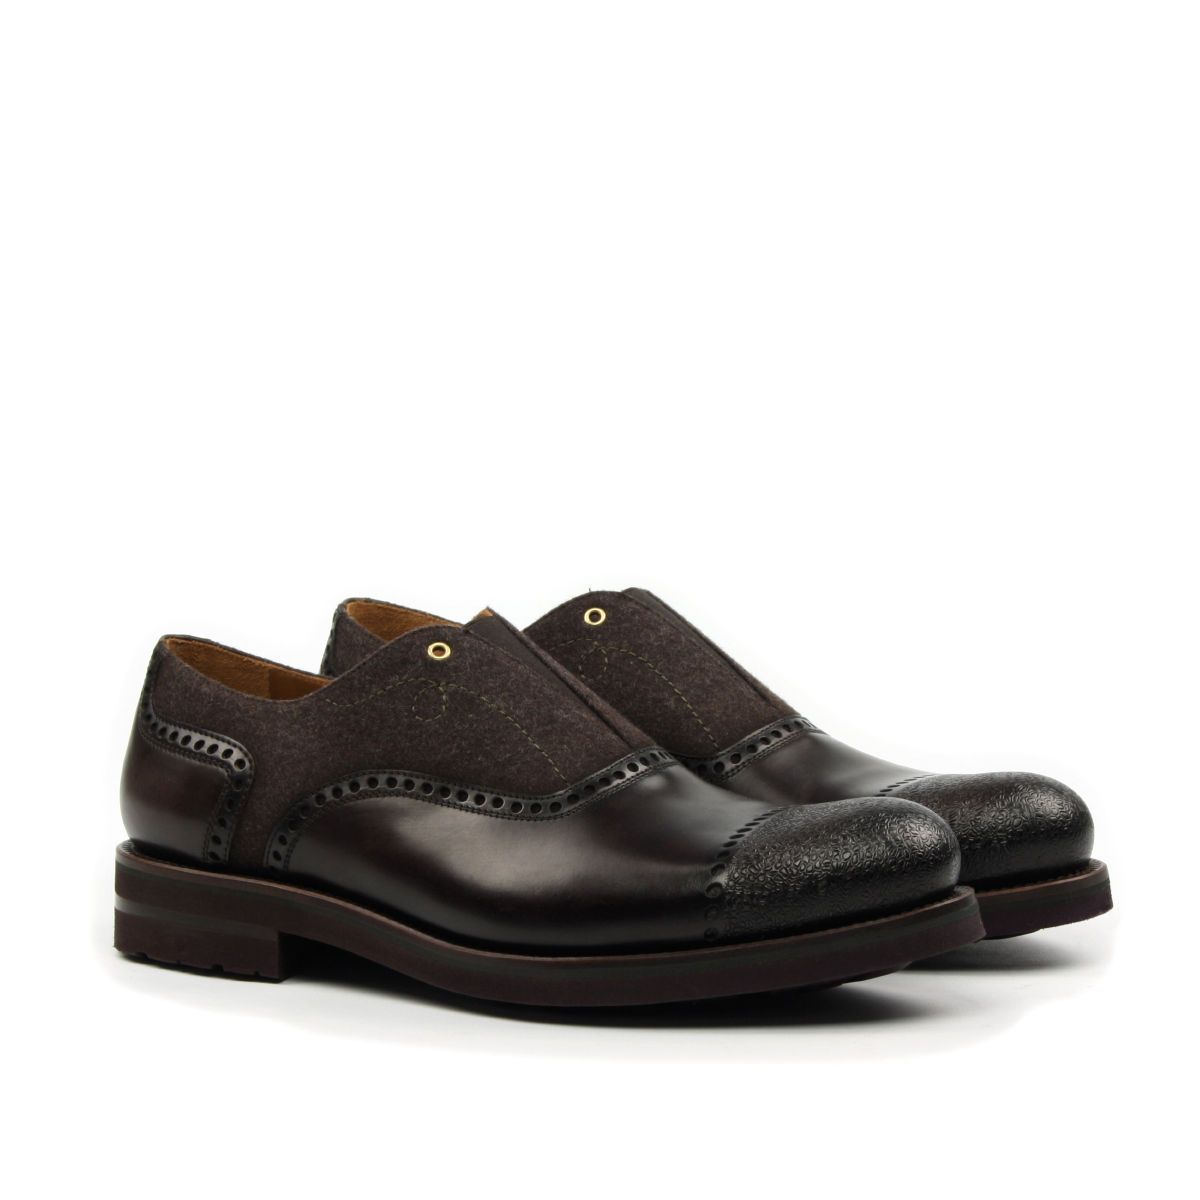 Omine Engraved Toe Oxford With Elastic